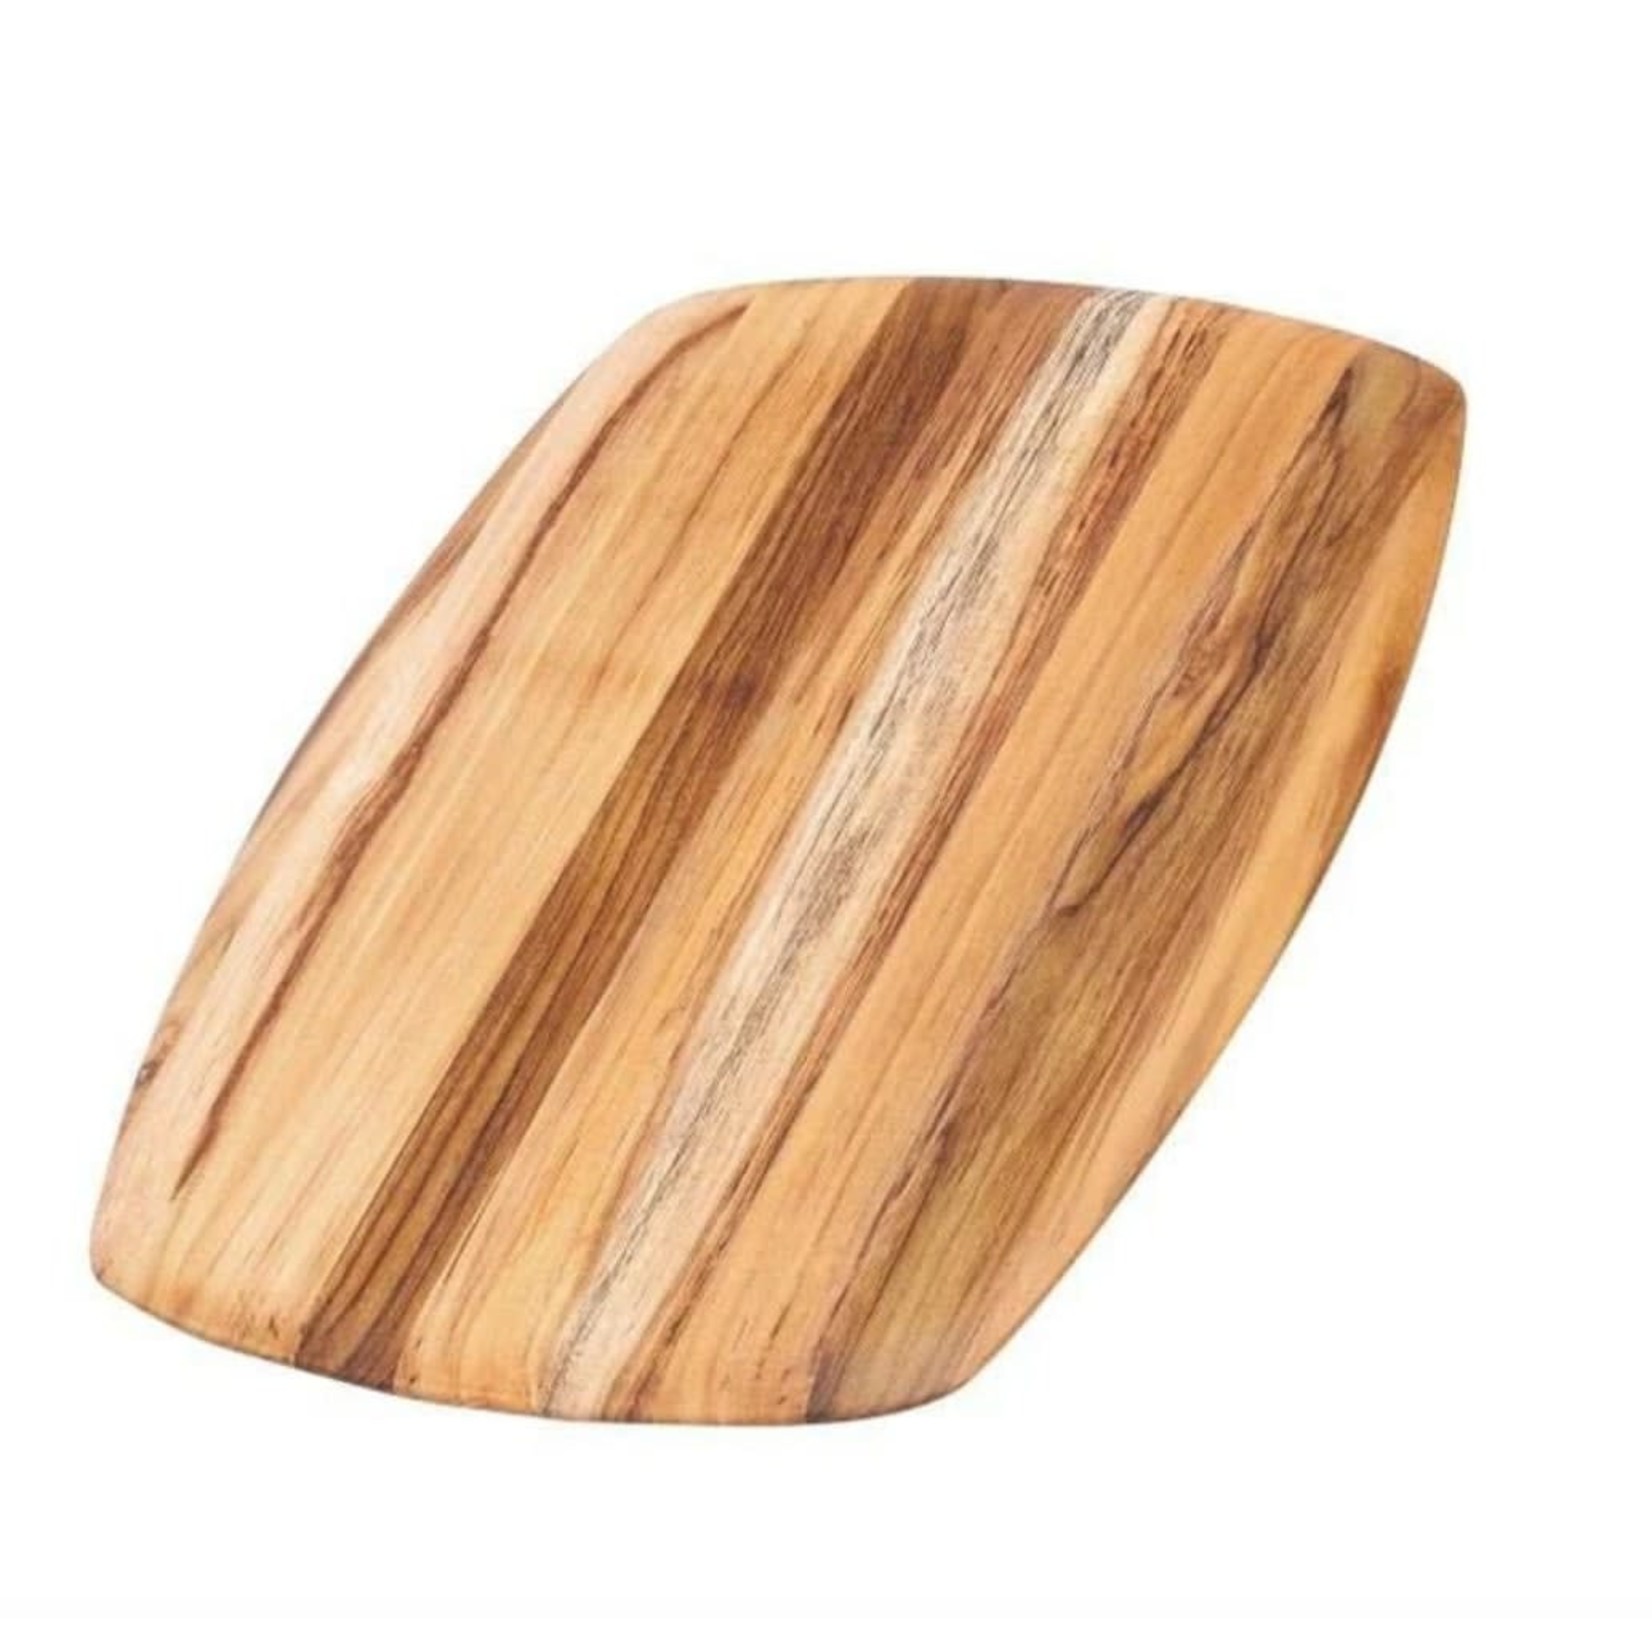 TEAKHAUS TEAKHAUS Rounded Edge Cutting / Serving Board 16x11"